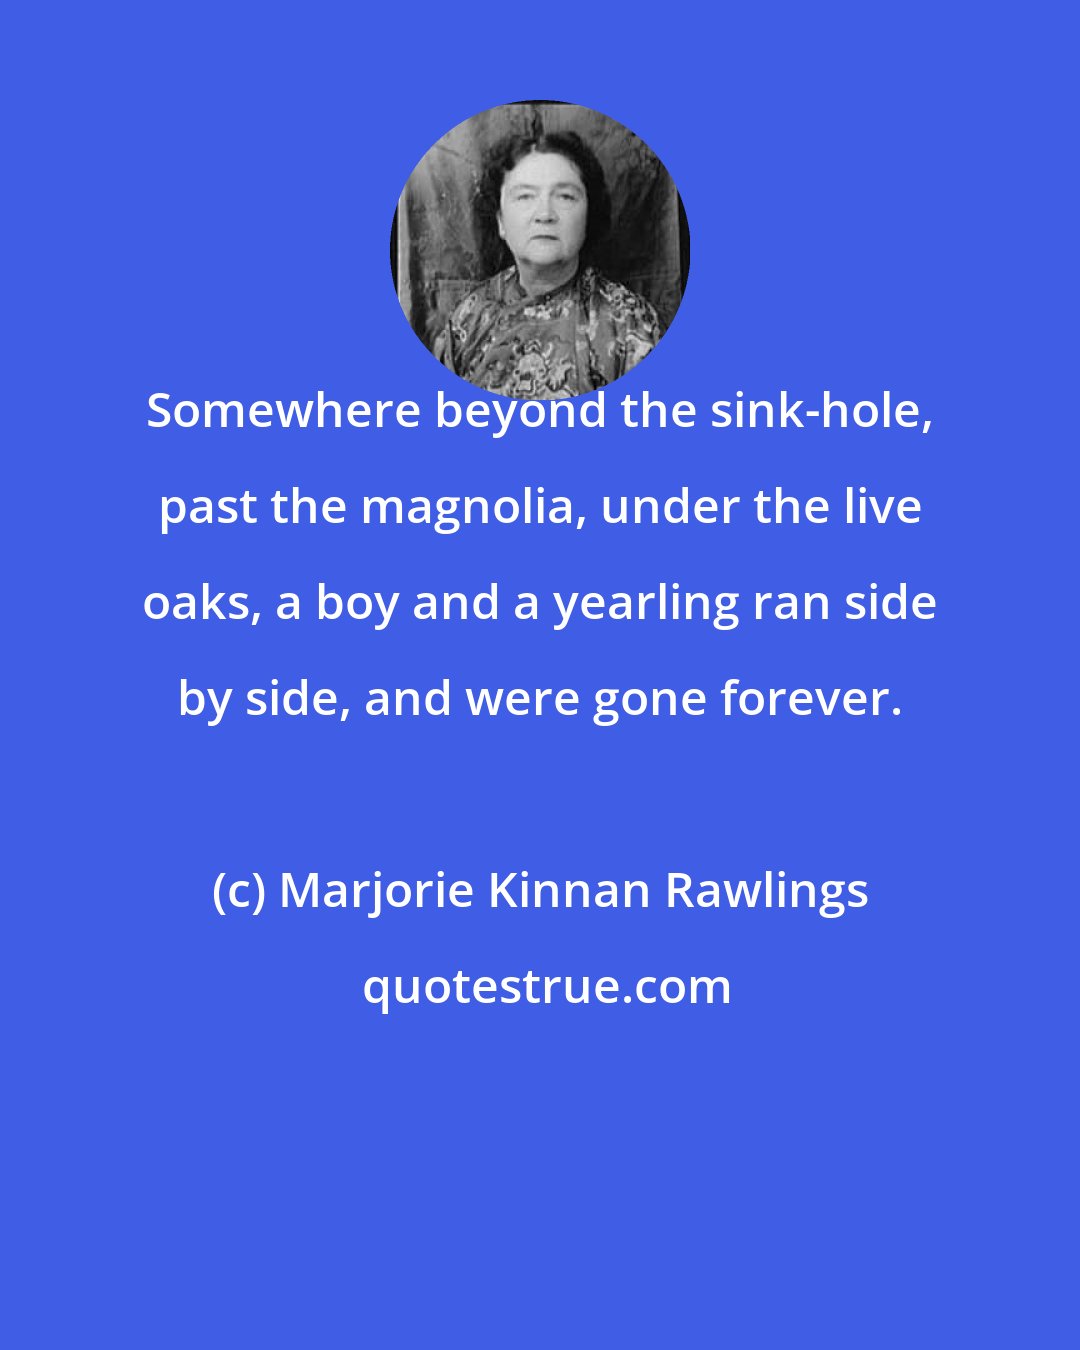 Marjorie Kinnan Rawlings: Somewhere beyond the sink-hole, past the magnolia, under the live oaks, a boy and a yearling ran side by side, and were gone forever.